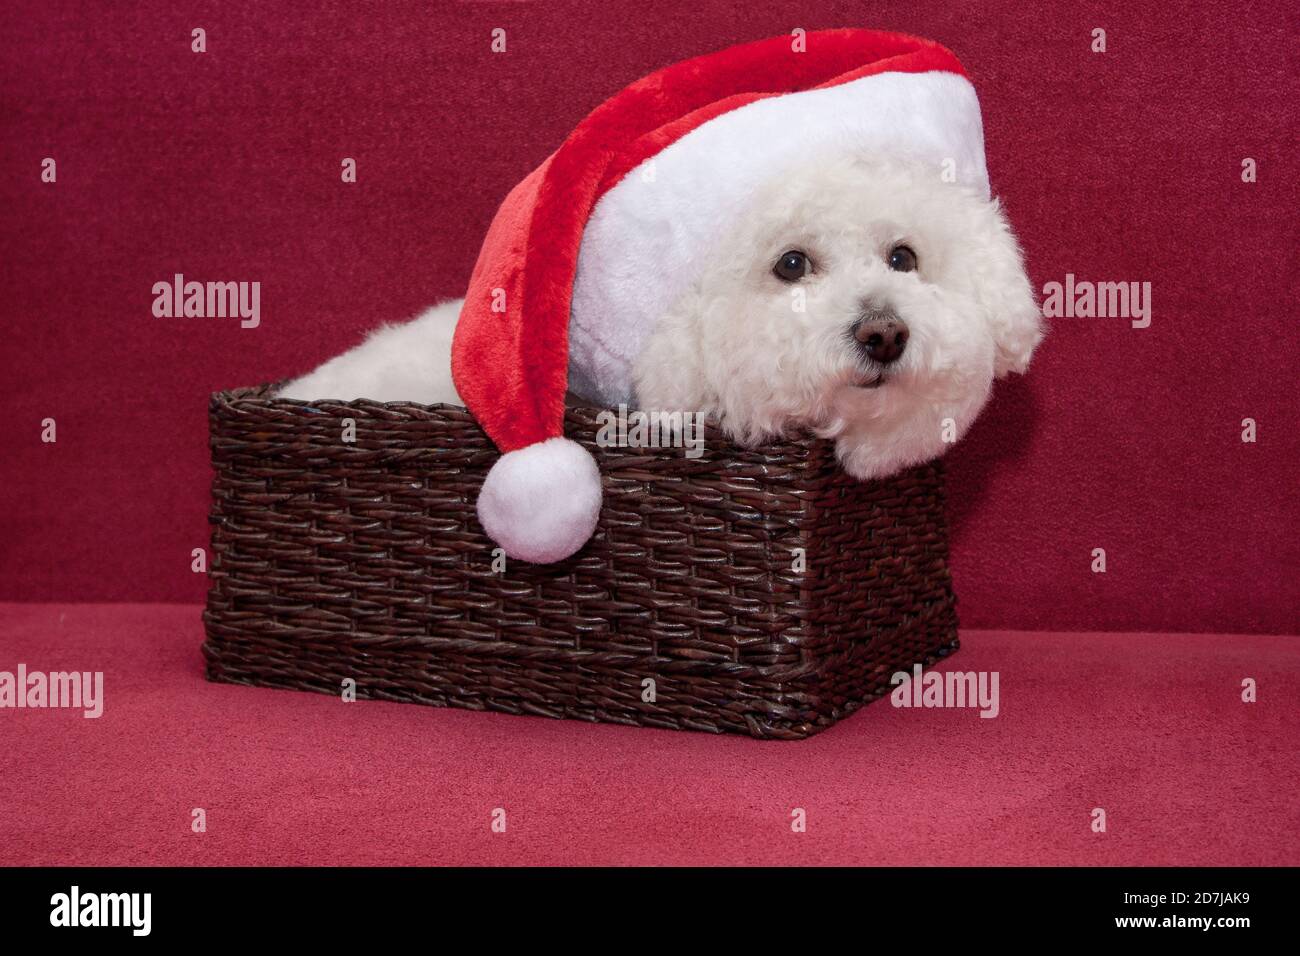 Cute bichon frise in santa claus hat is sitting in a wicker basket. Pet animals. Christmas holidays Stock Photo